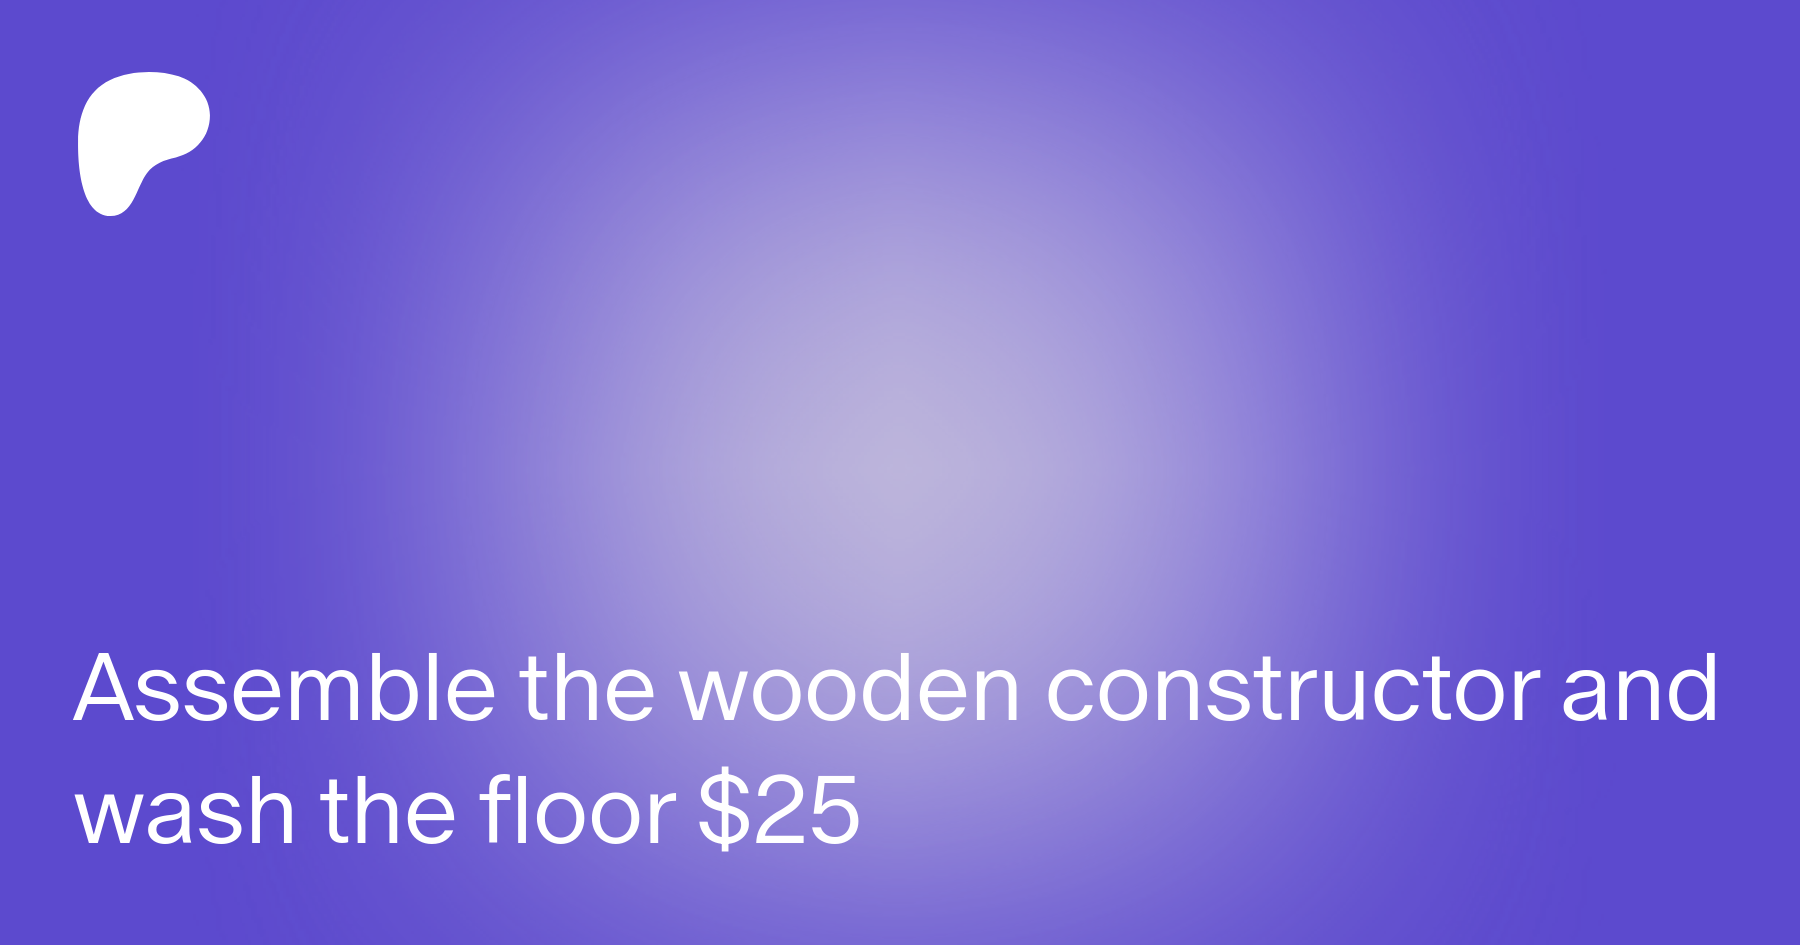 Assemble the wooden constructor and wash the floor $25 | Patreon